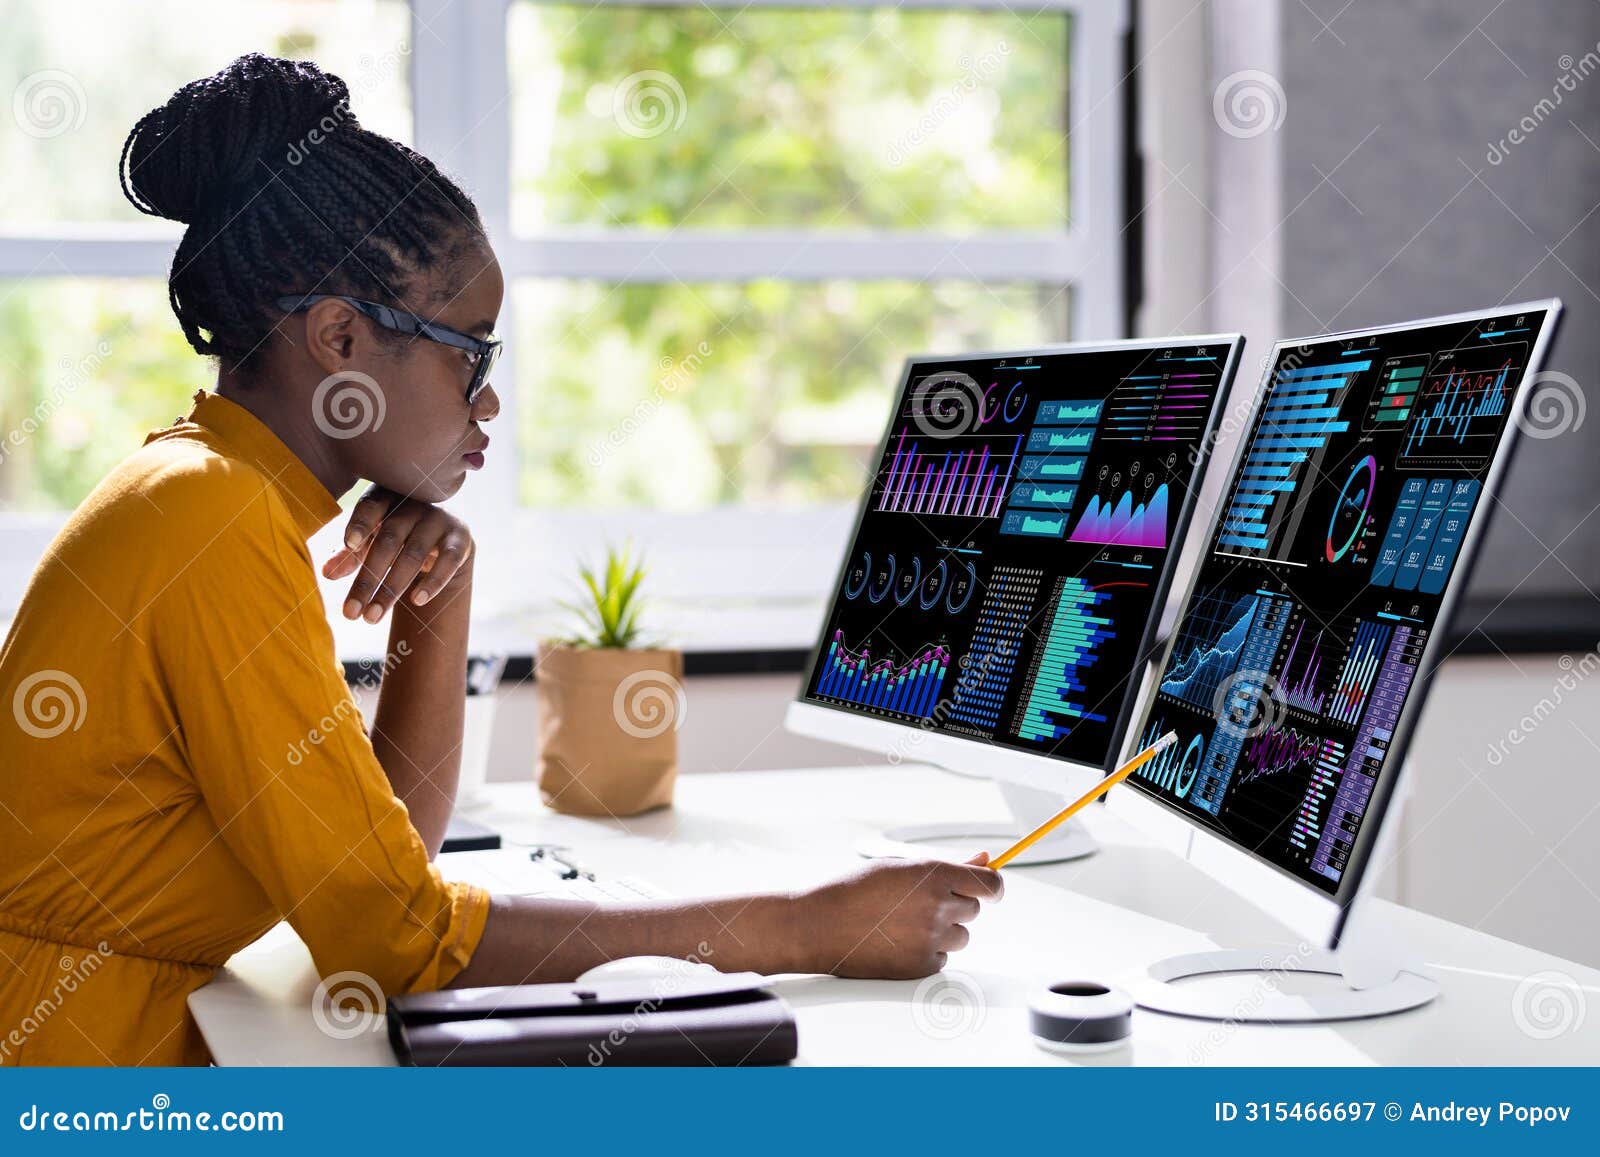 analyst woman looking